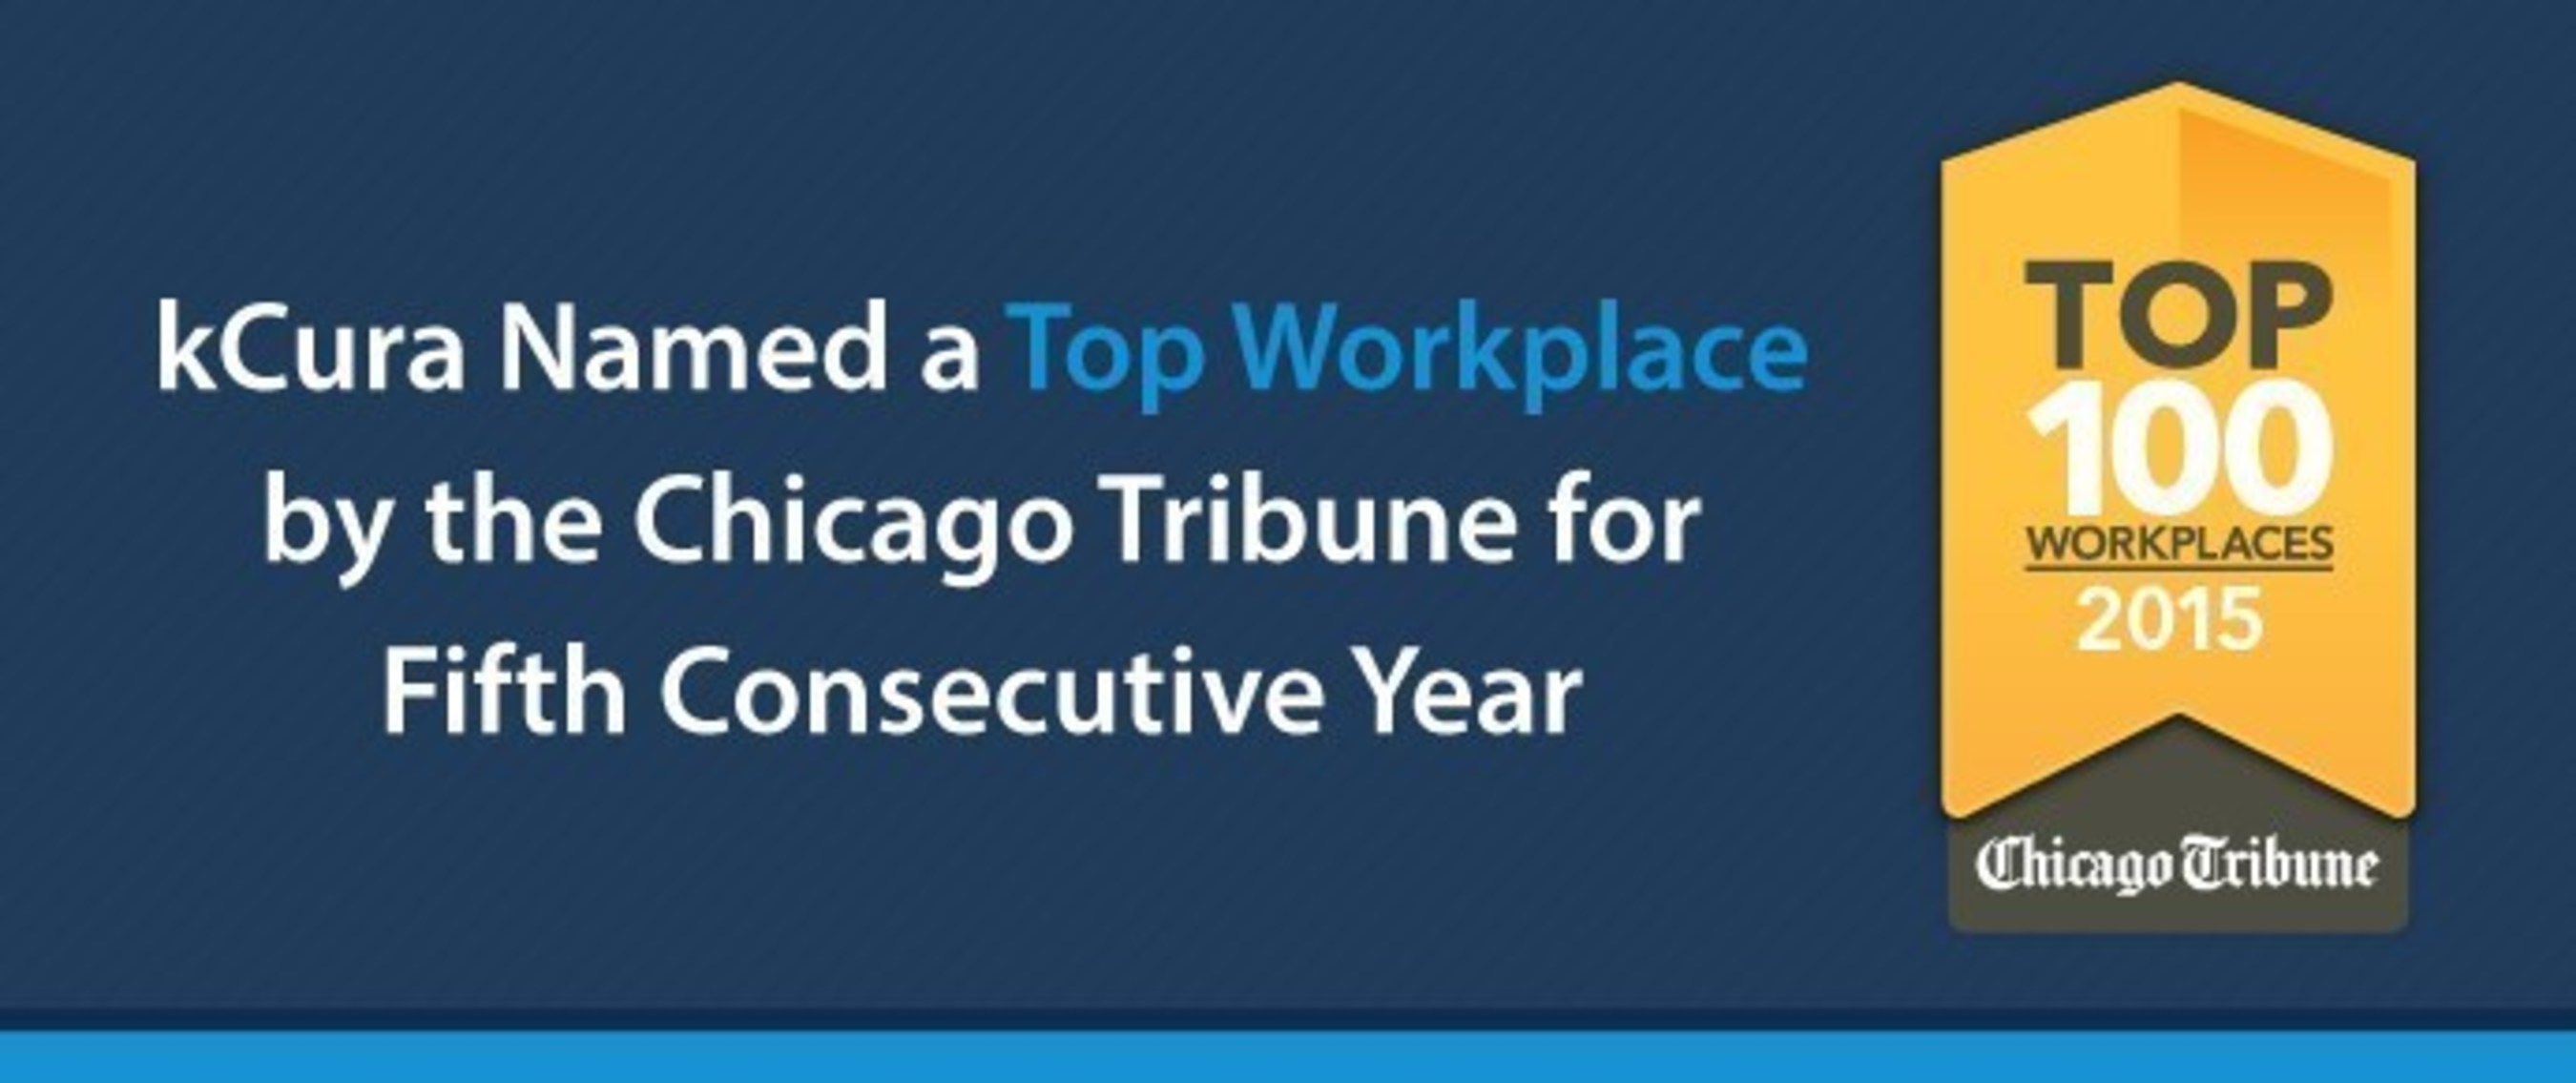 kCura Named a Top Workplace by the Chicago Tribune for the Fifth Consecutive Year (PRNewsFoto/kCura)